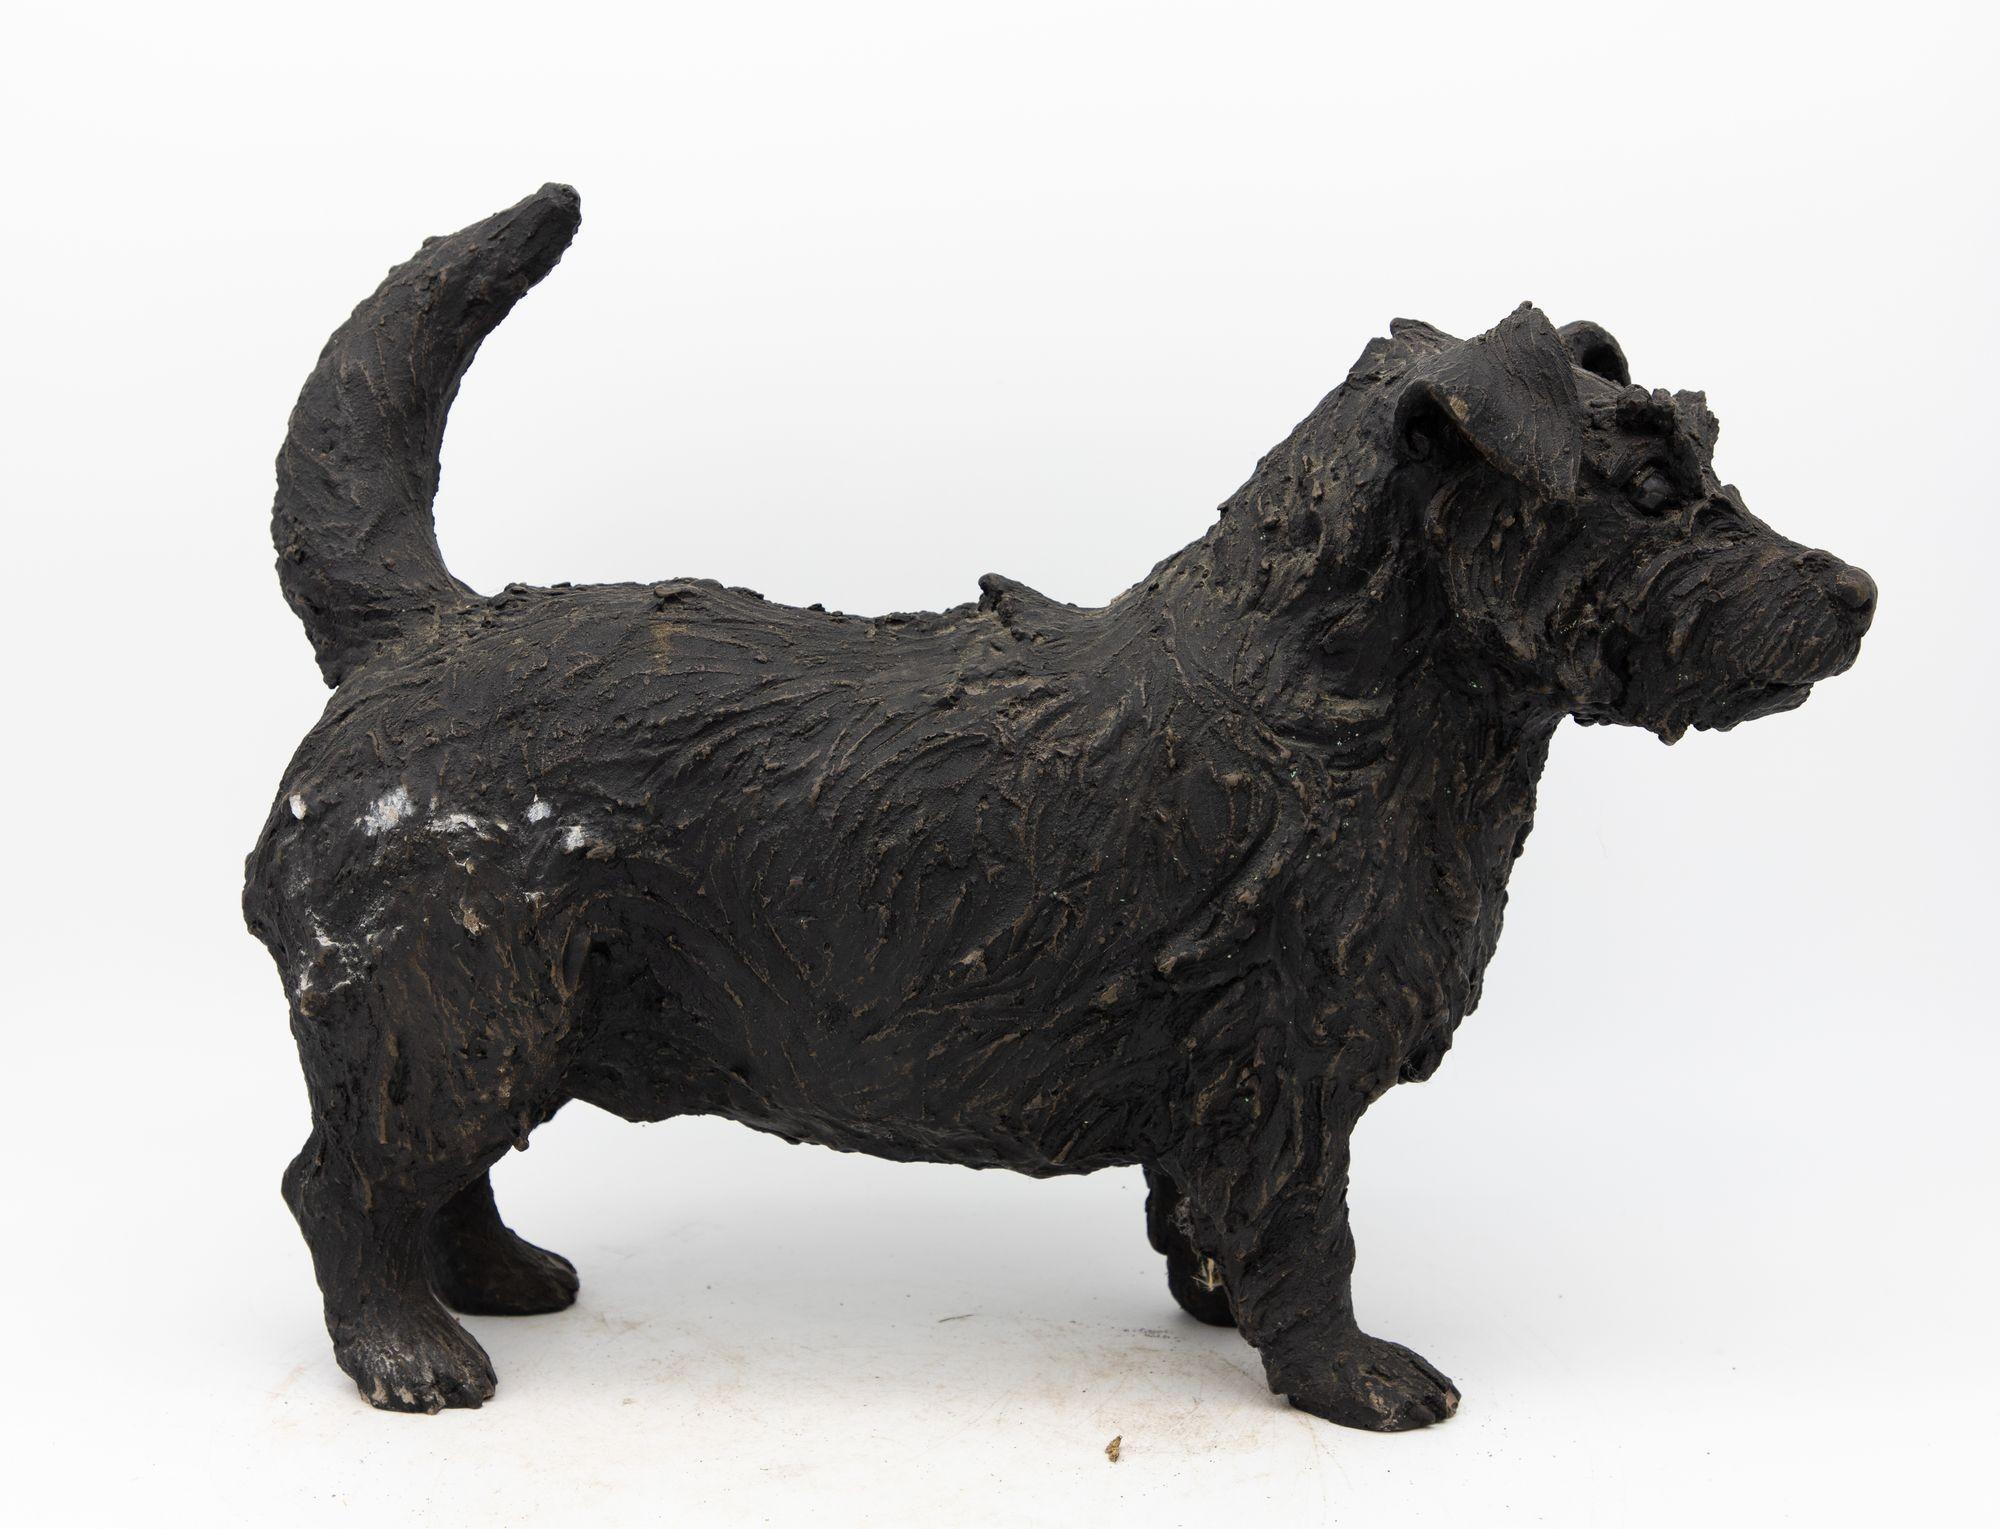 This Mid-20th century bronze sculpture is a delightful representation of a Scottie Dog or Scottish Terrier, capturing the essence of this iconic breed's spirited personality. Crafted with skillful artistry, the sculpture showcases the Scottie's